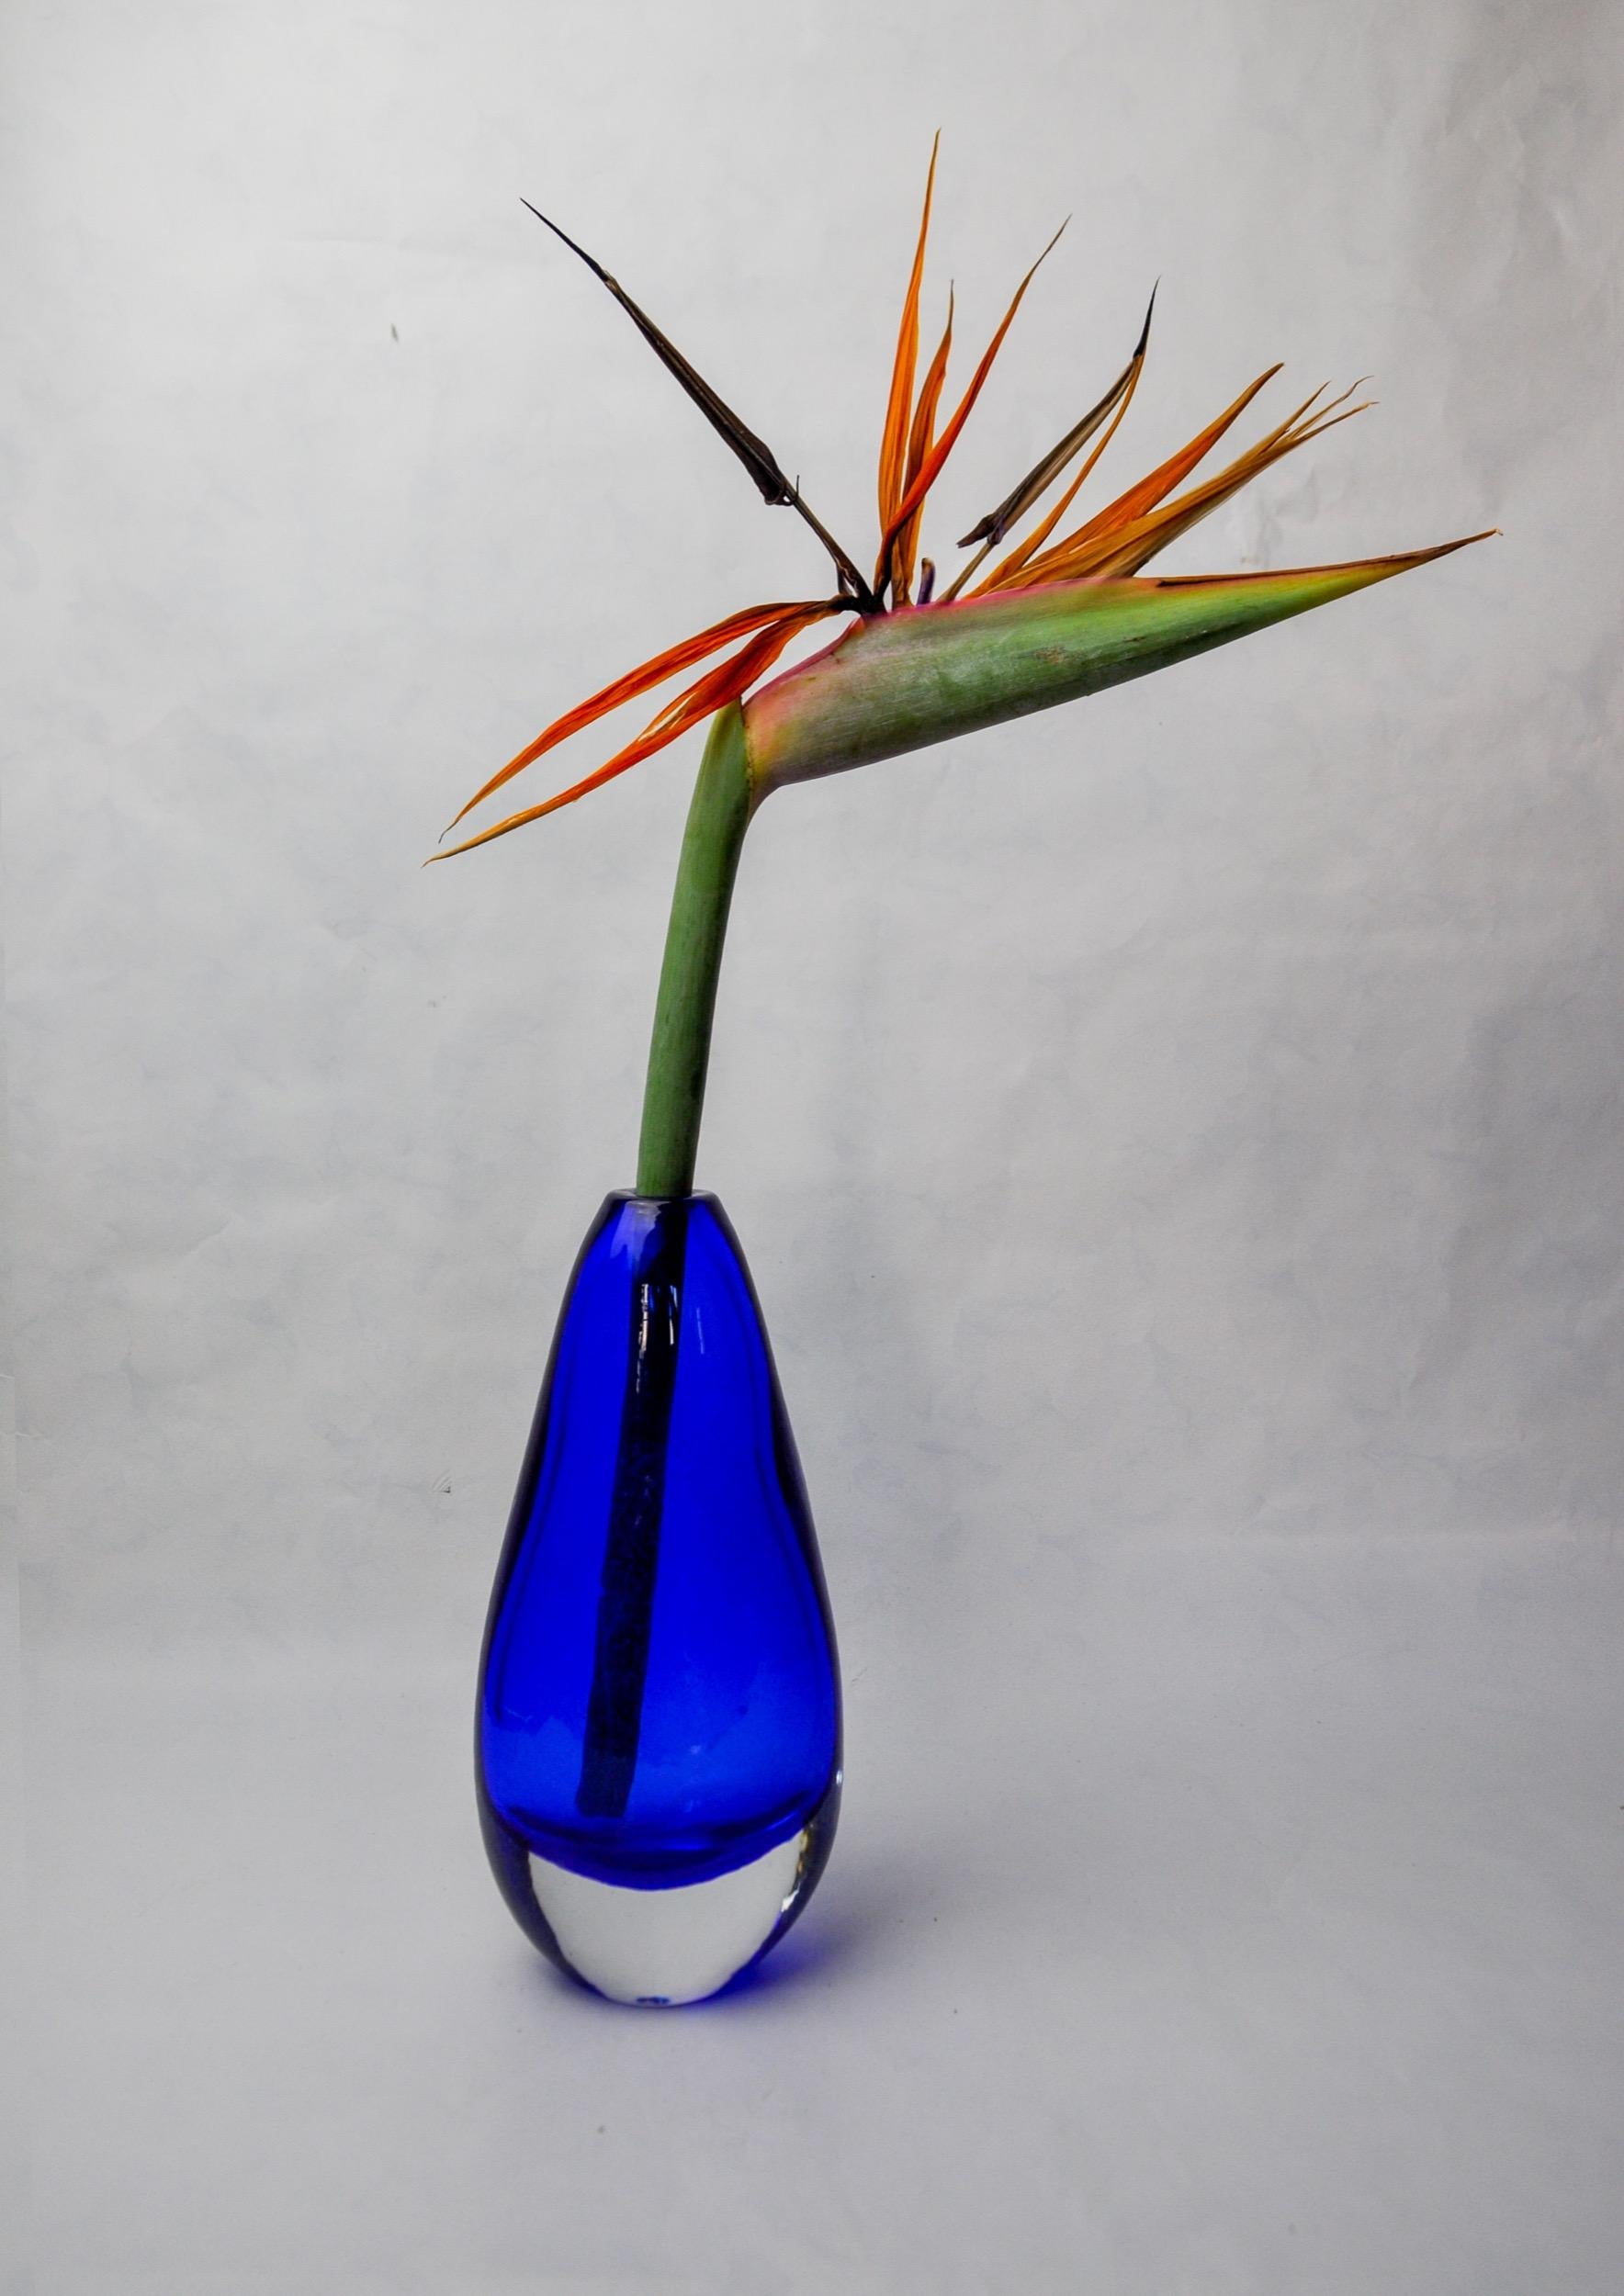 Superb and rare blue sommerso vase designed and manufactured by seguso in murano in the 1970s. Artisanal glass work according to the 